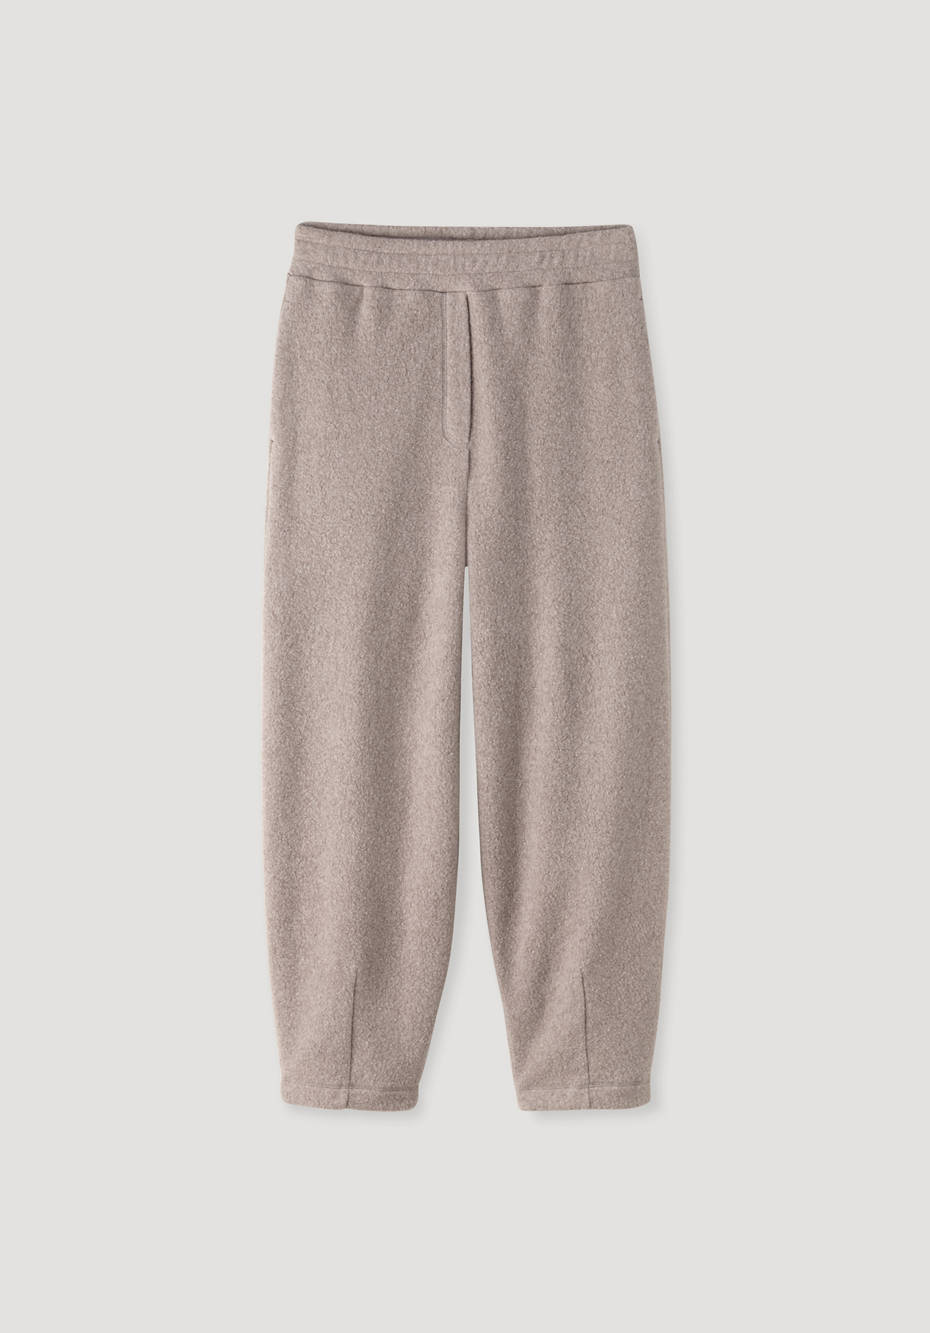 https://imgs7.hessnatur.com/is/image/HessNatur/hyb_redes_detail_main/Fleece_trousers_Relaxed_ACTIVE_LIGHT_made_from_pure_organic_cotton-53429_32_7.jpg